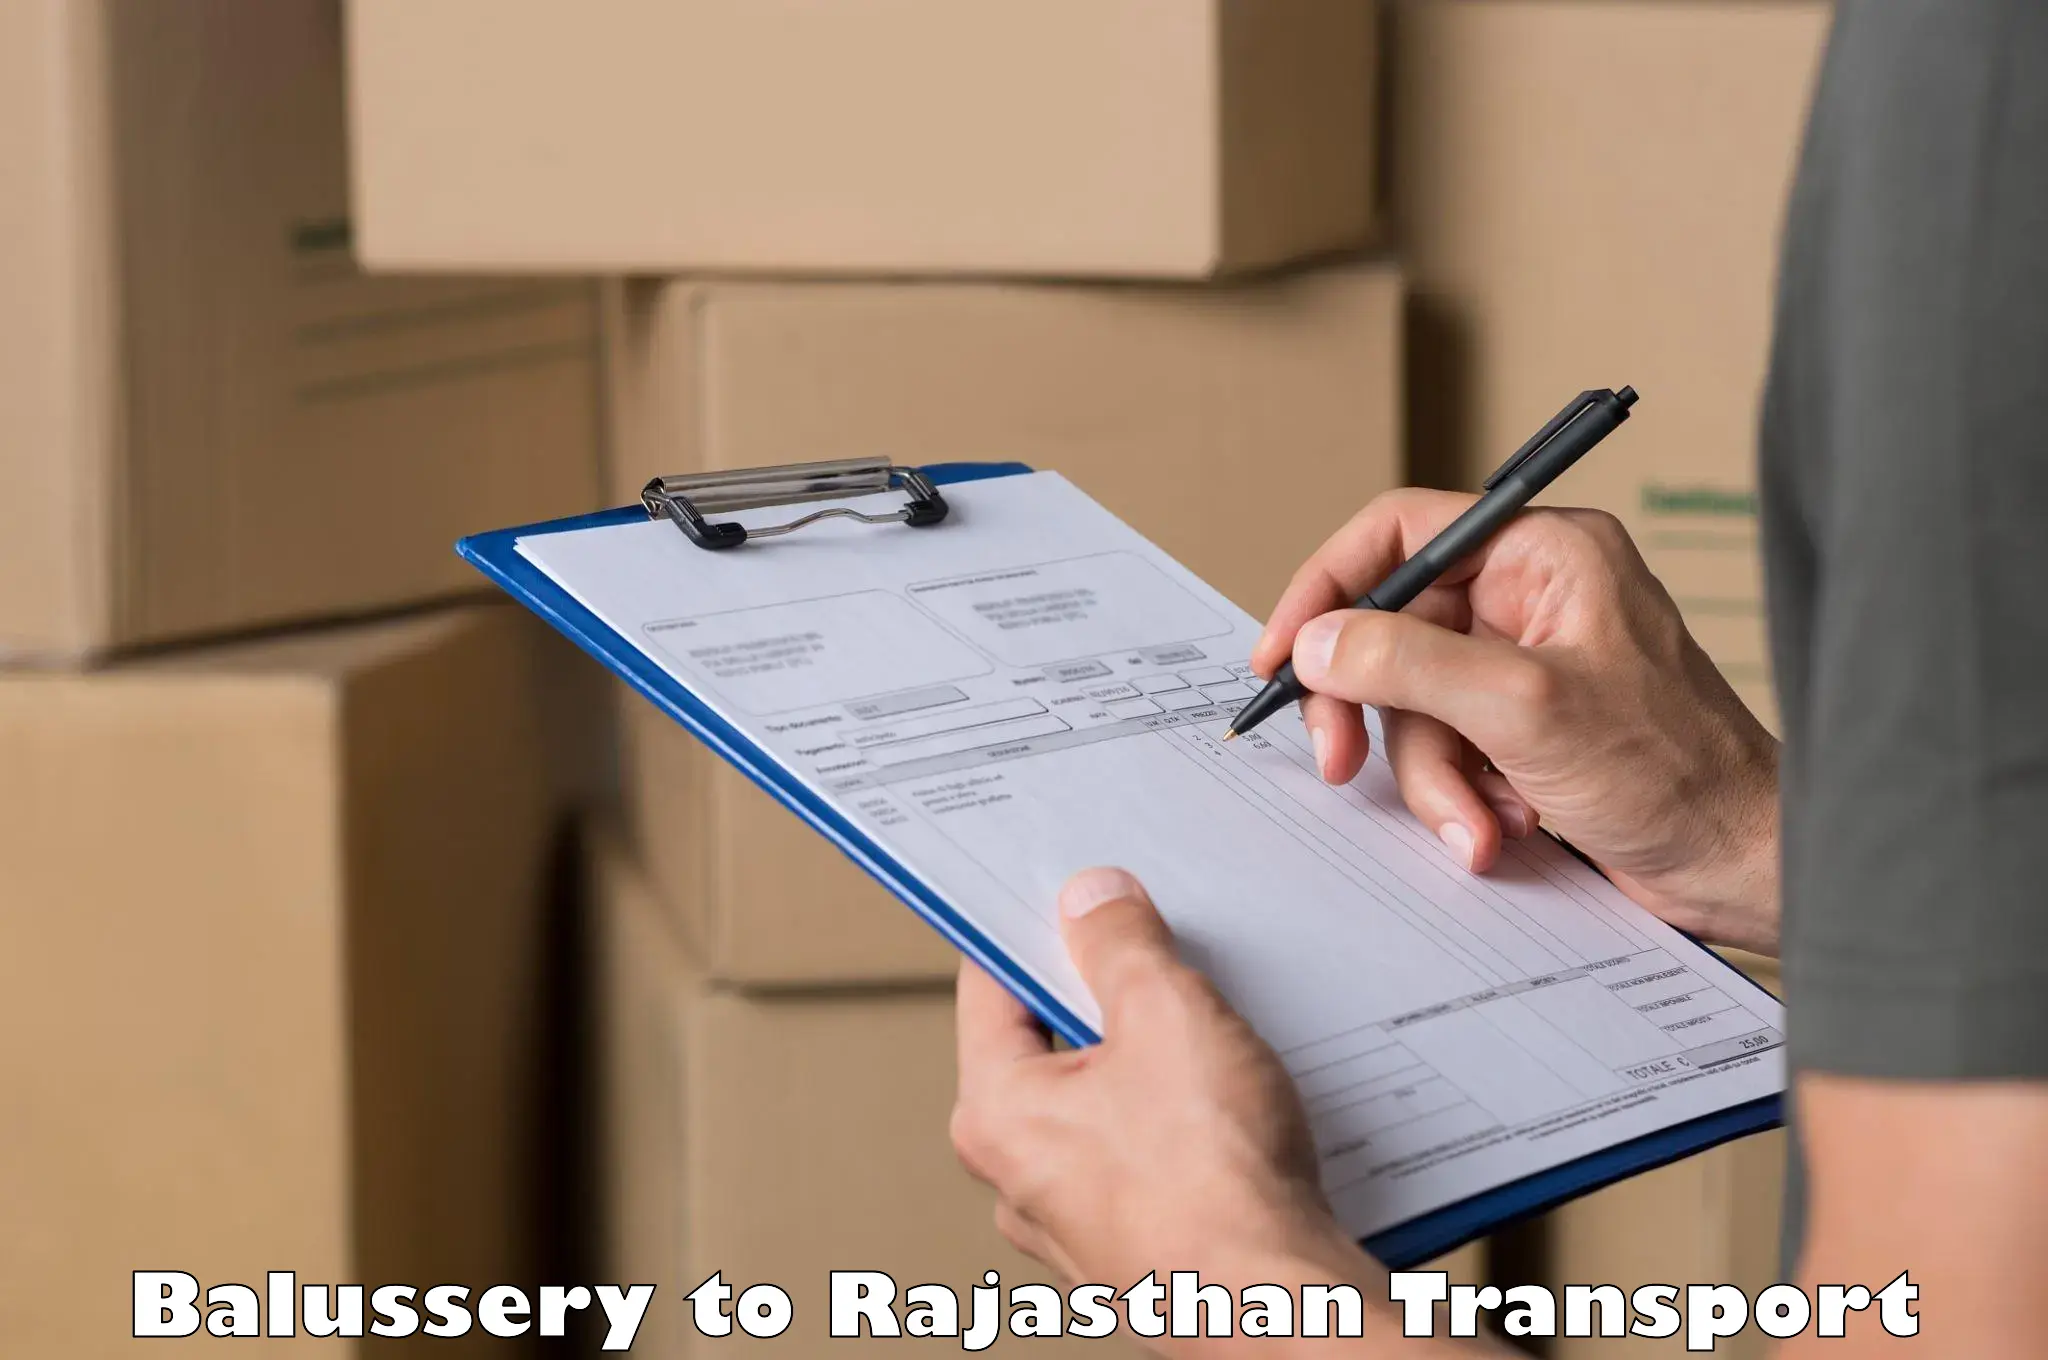 Commercial transport service Balussery to Kumbhalgarh